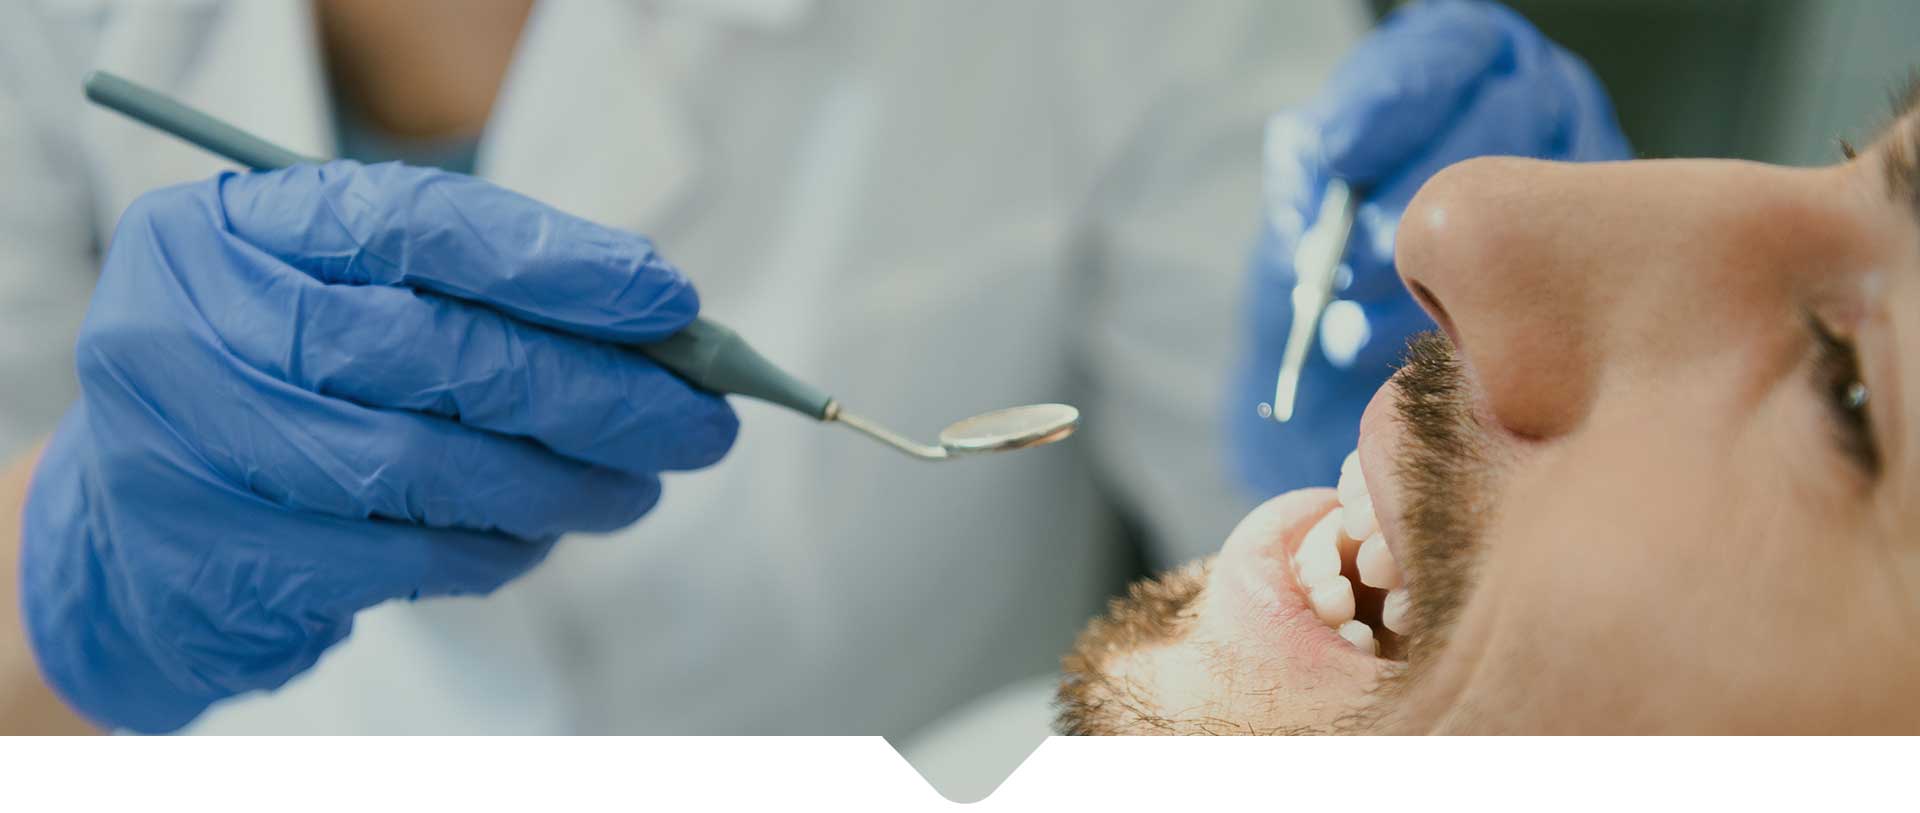 A male patient getting dental examination at the dentist